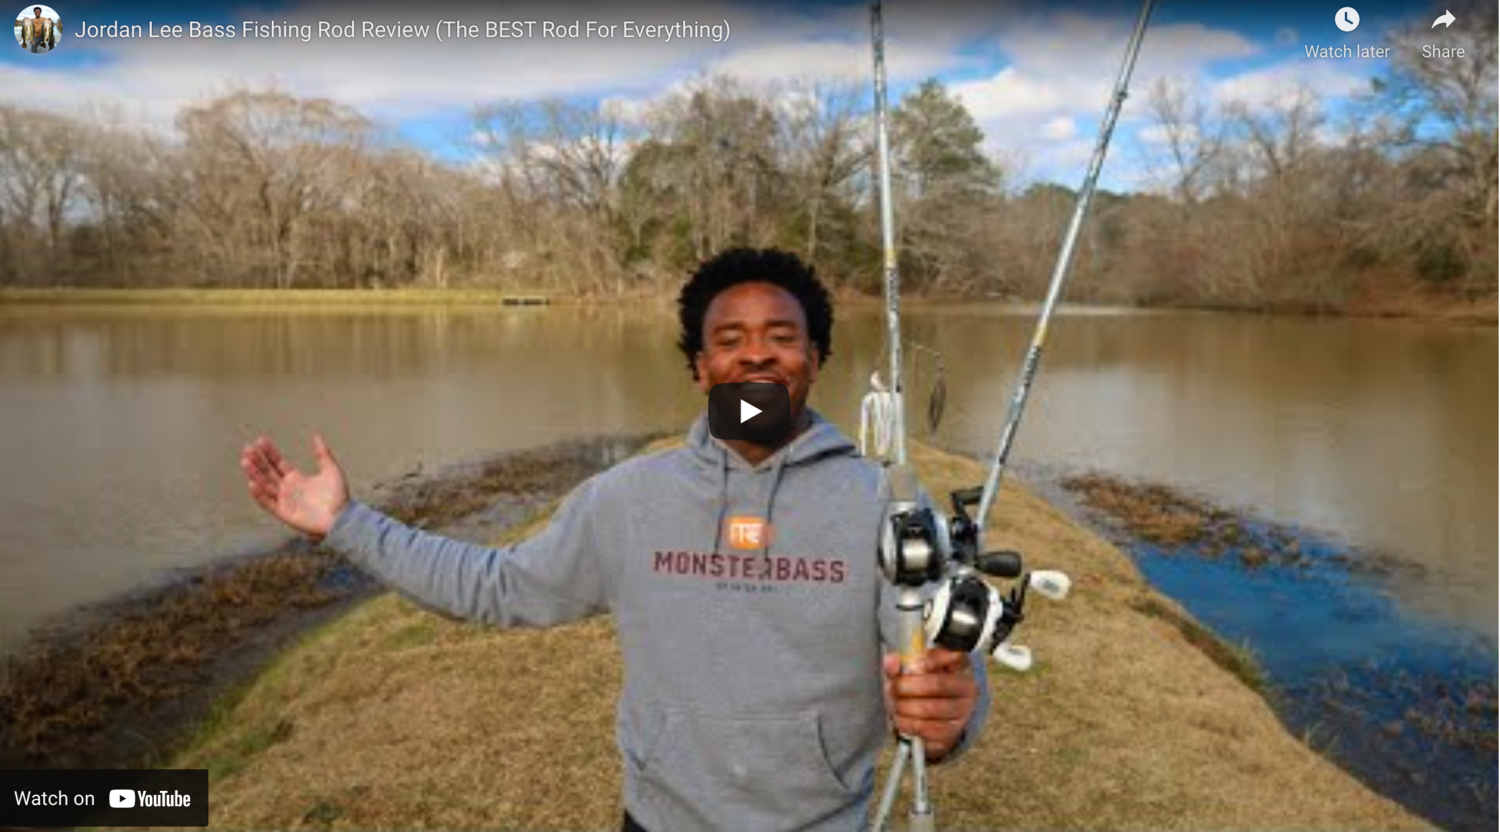 Jordan Lee Bass Fishing Rod Review (The BEST Rod For Everything